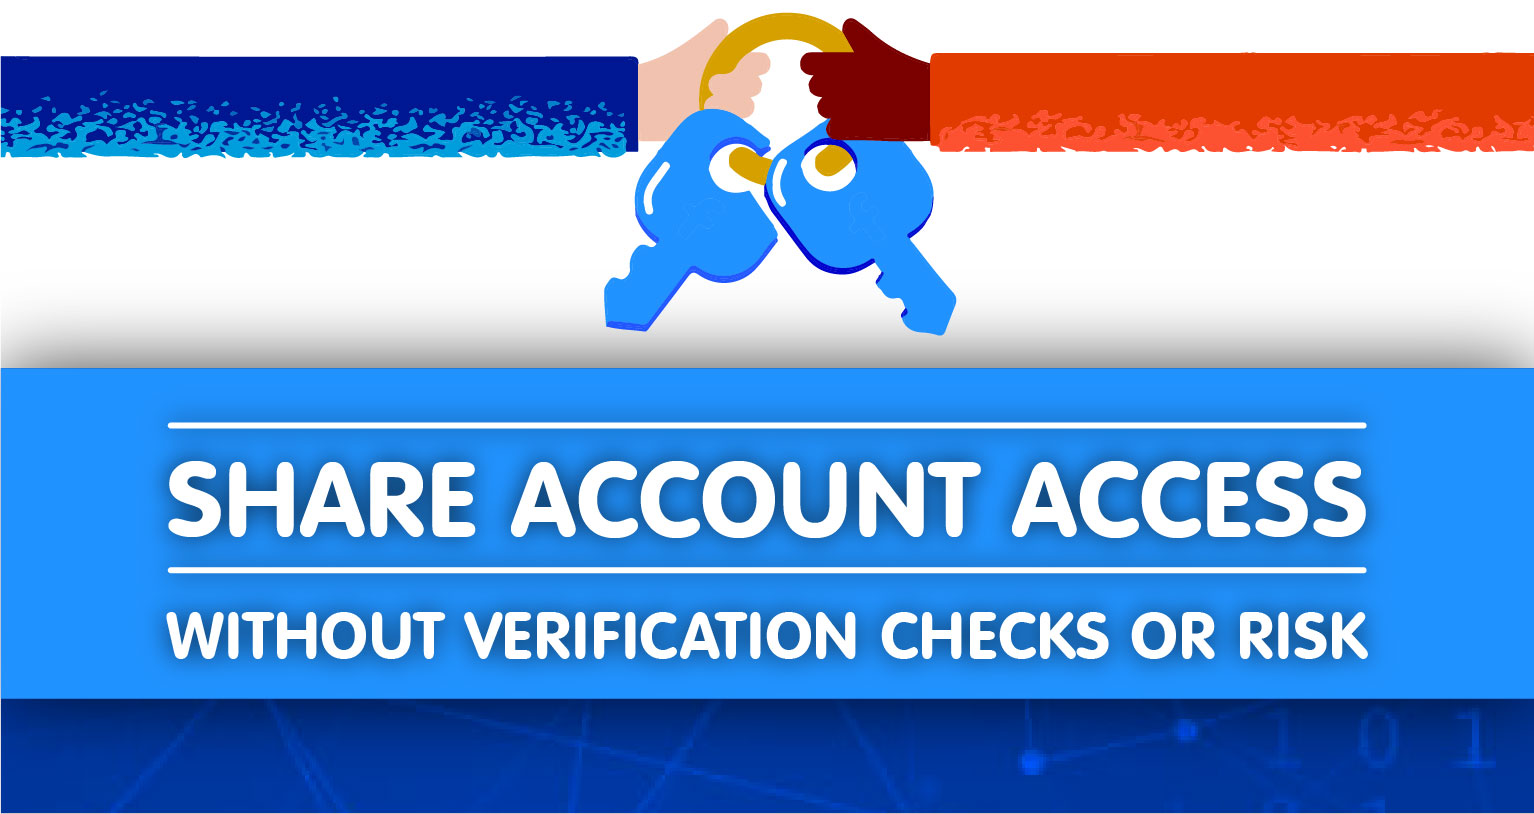 Share account access without verification checks or risk